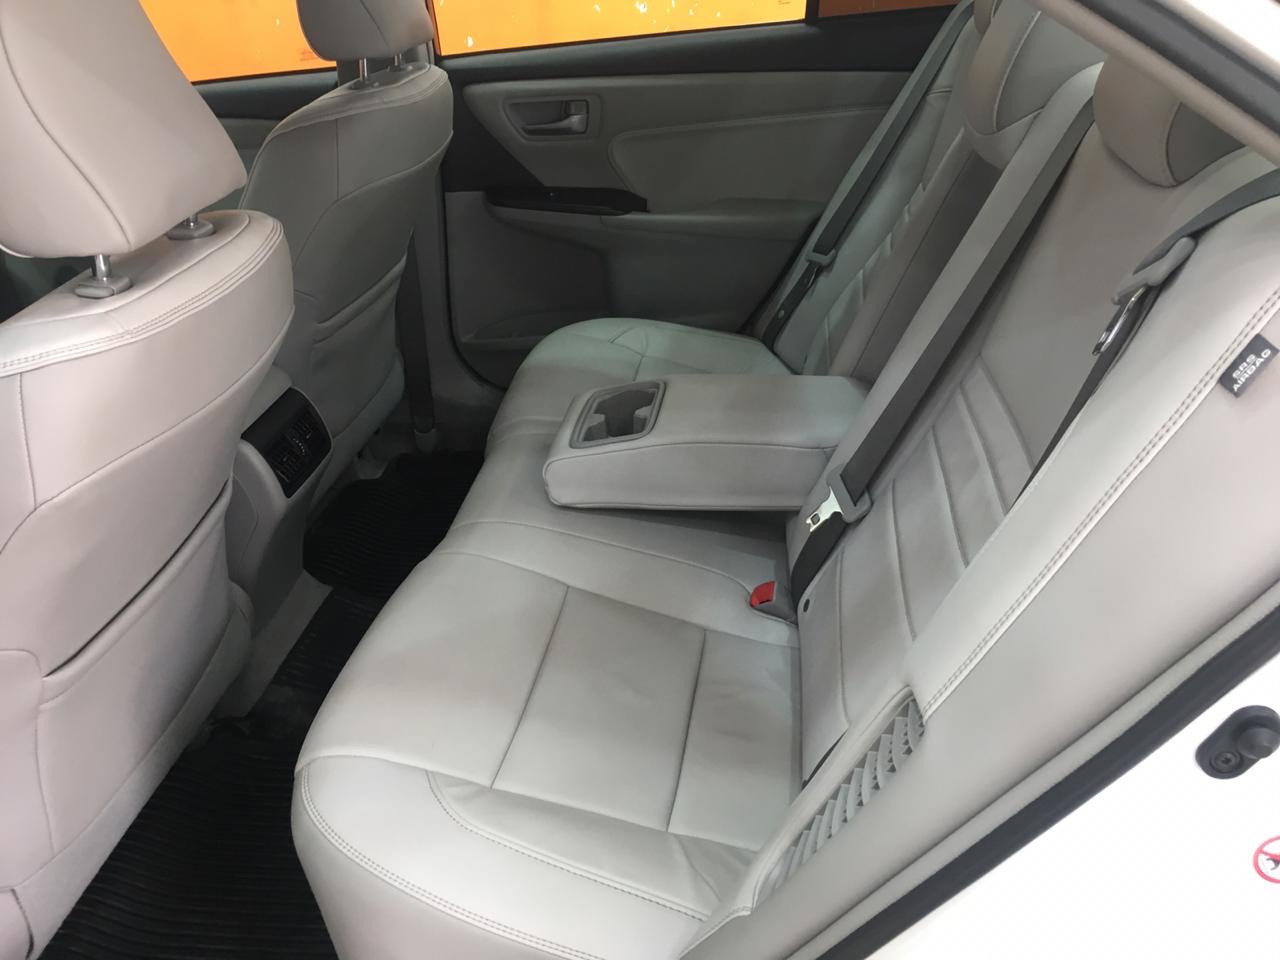 Lexus LX 570 SUV 2017 GCC is very clean like brand new with warranty,White 2017 model, This car has automatic transmission.GCC specs. CONTACT EMAIL: Mrharry1931-  تويوتا كامري 2017 فل الفل...